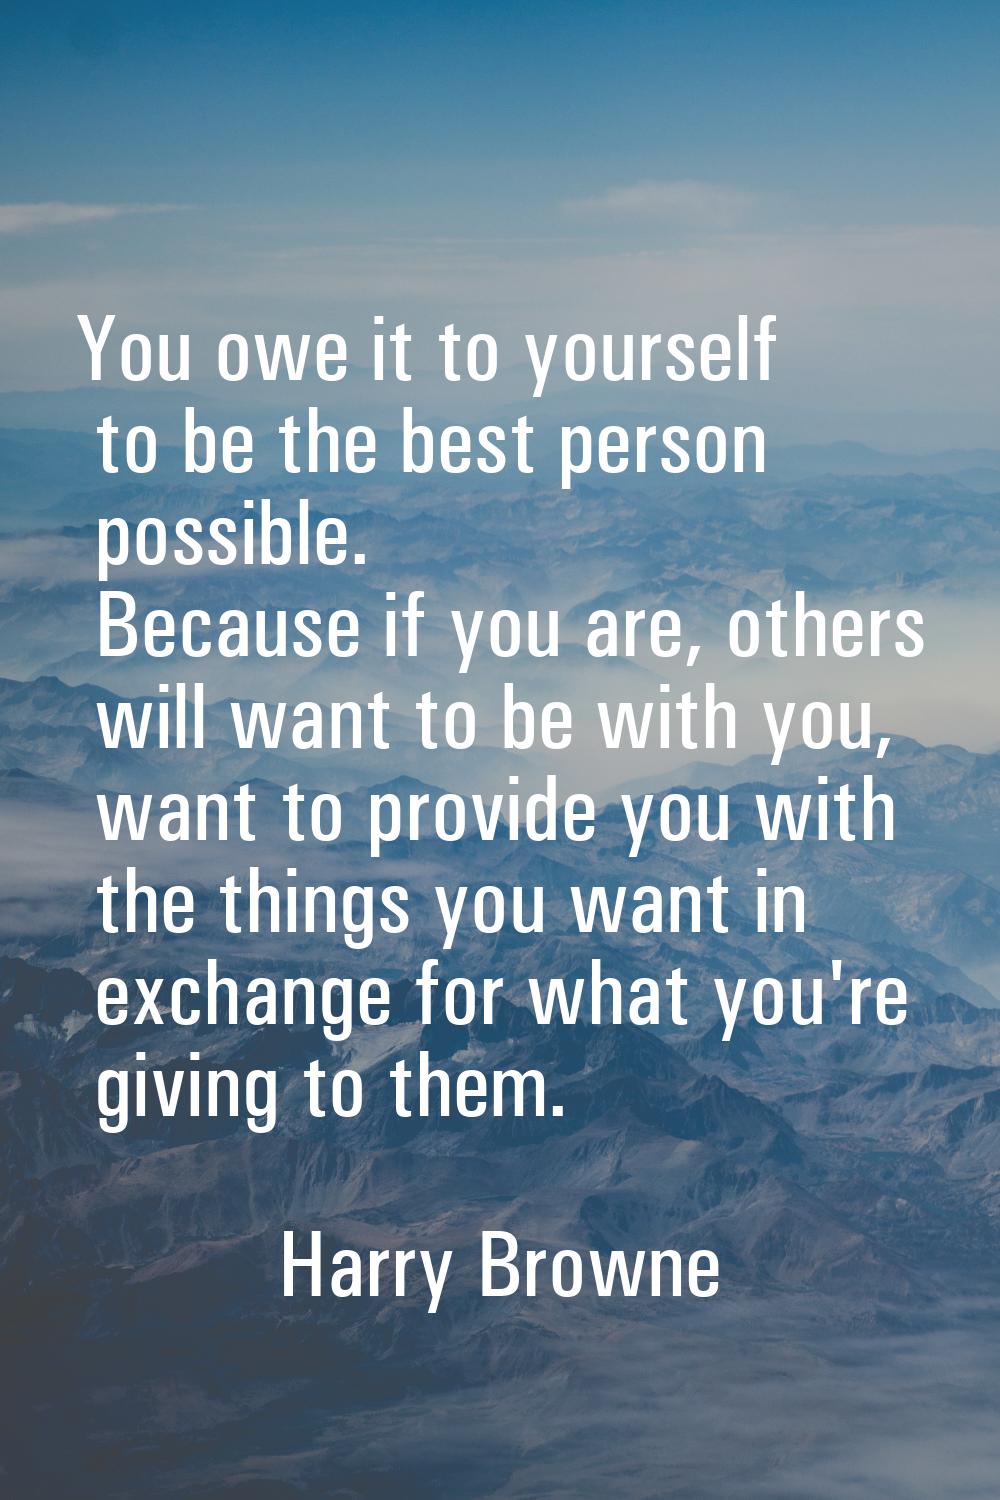 You owe it to yourself to be the best person possible. Because if you are, others will want to be w